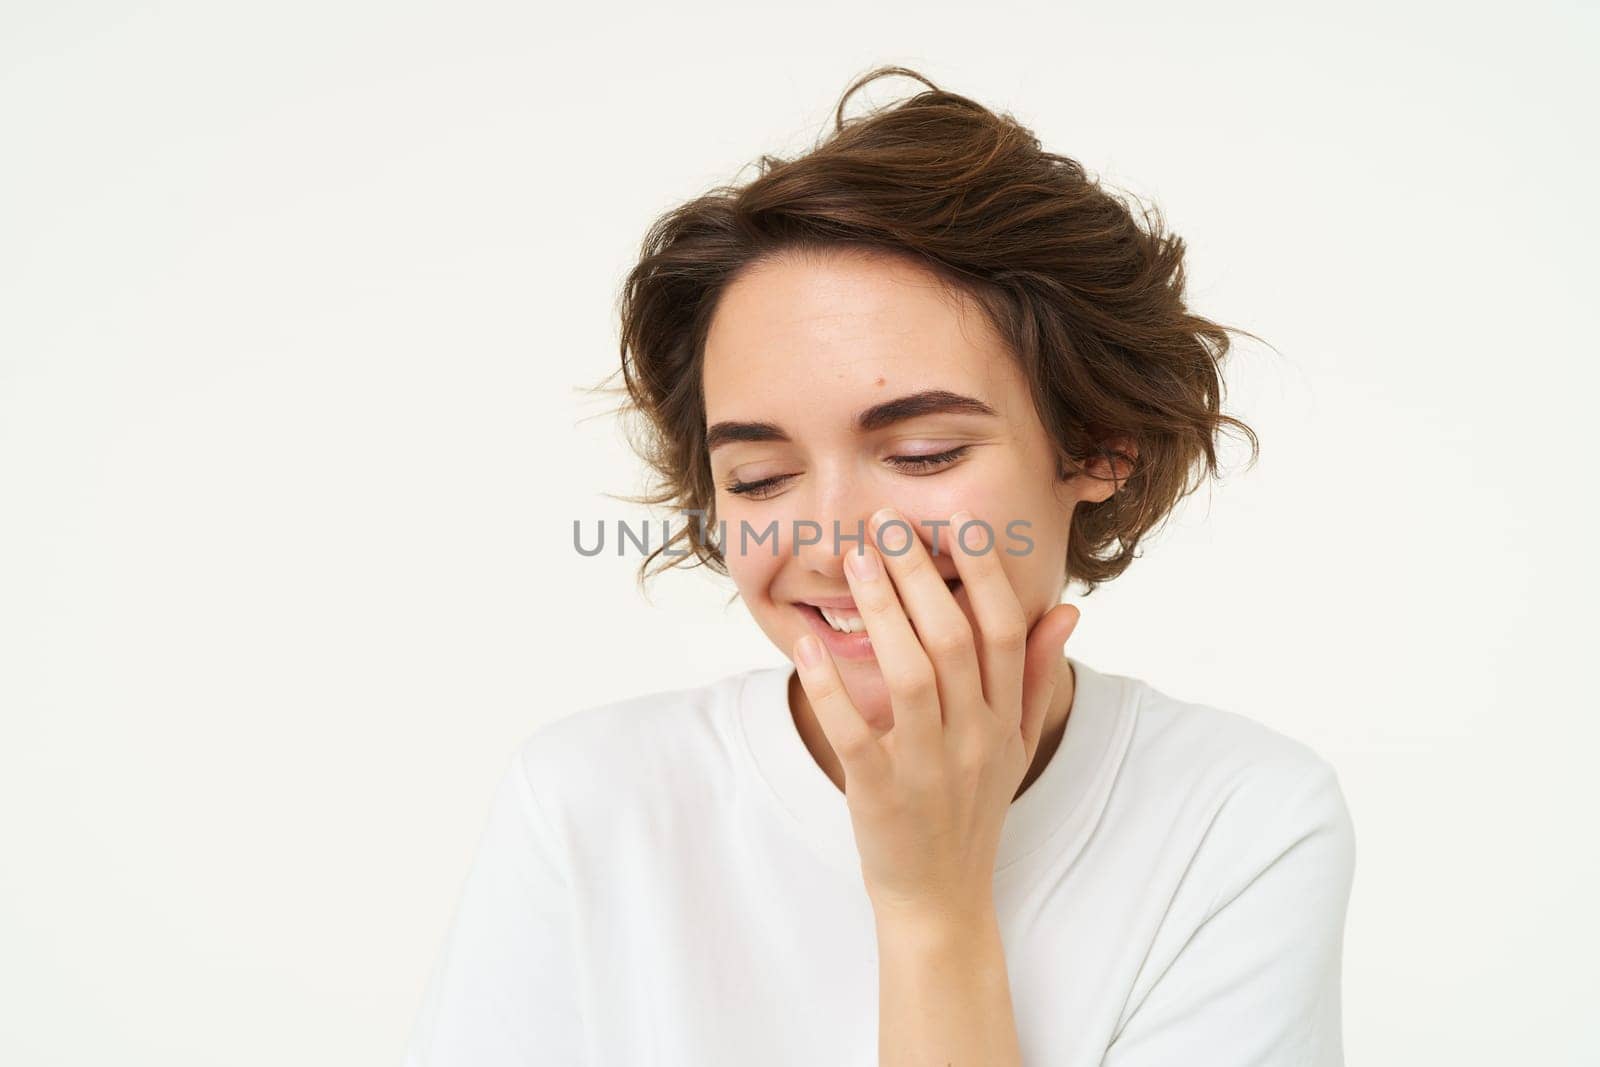 Portrait of brunette woman laughing, smiling and covering face with hand, looking shy and cute, standing over white background by Benzoix